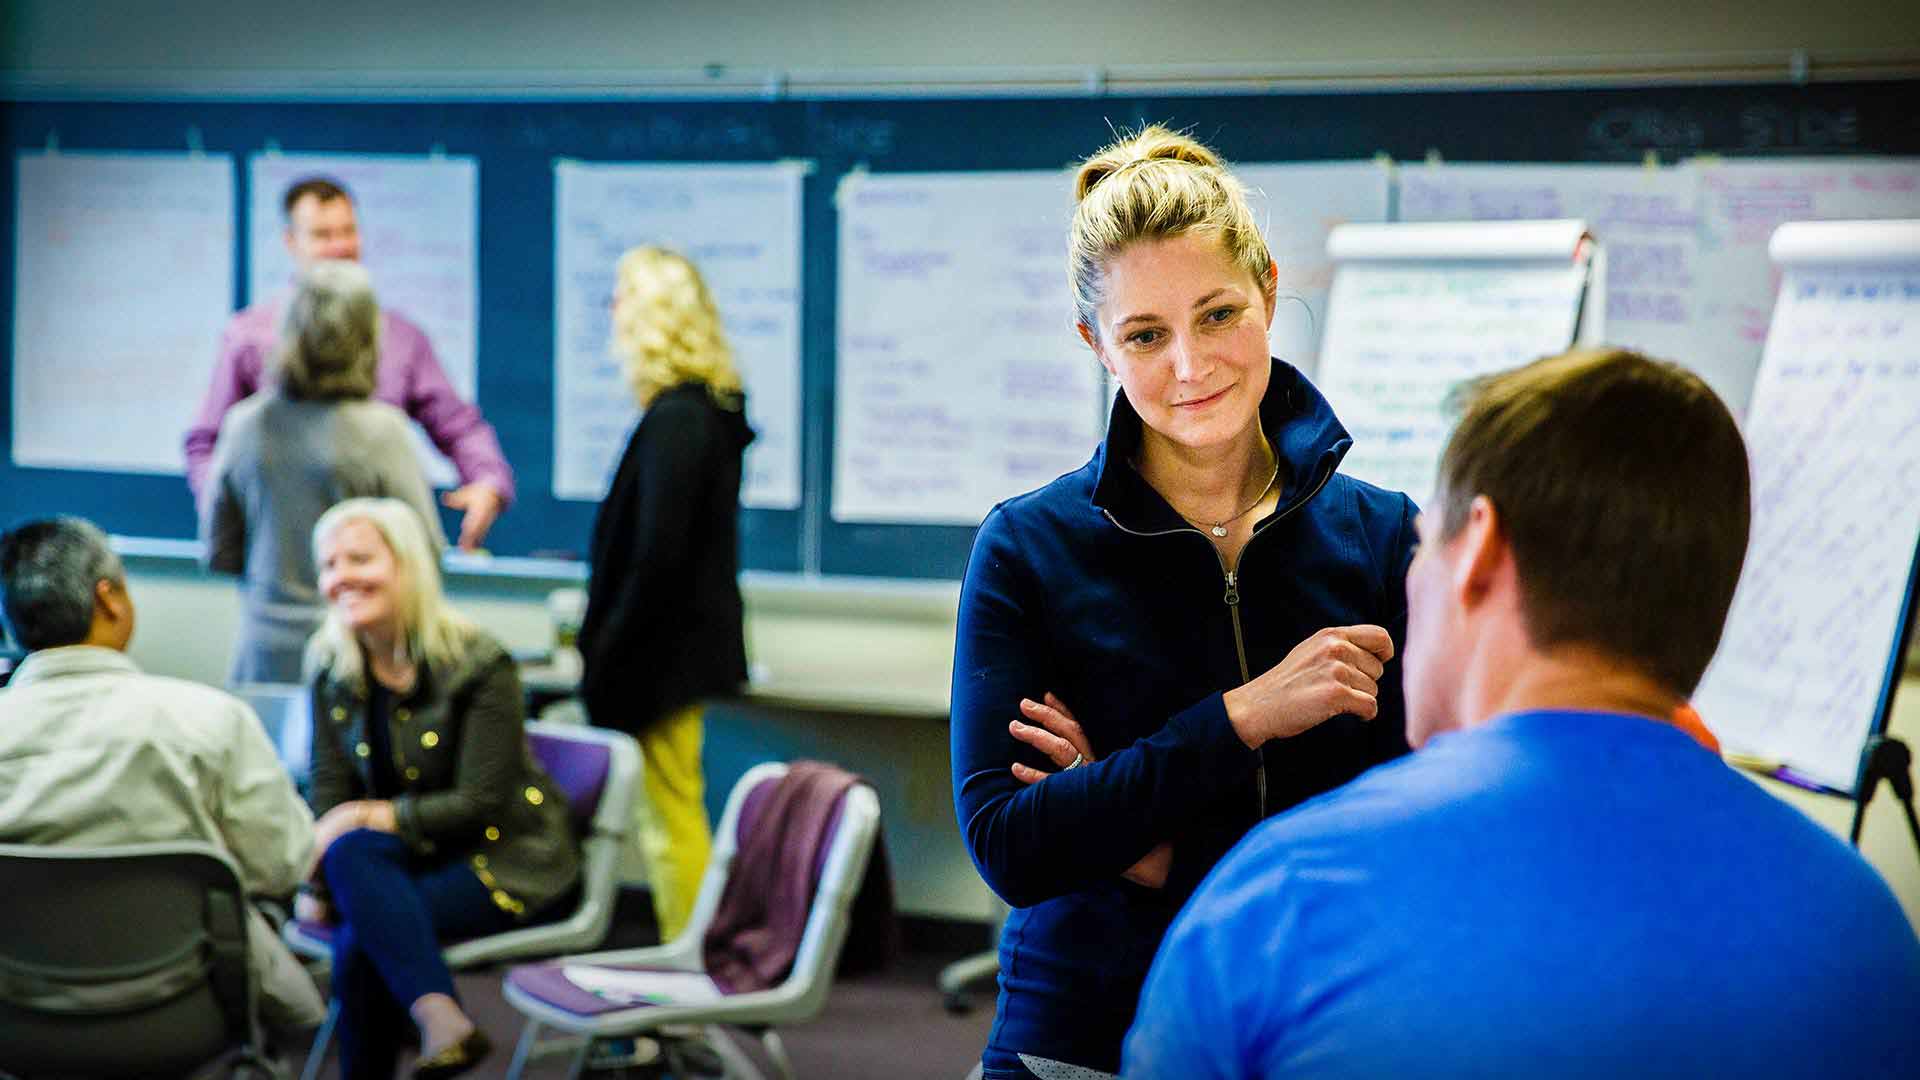 Two individuals talking in a classroom.